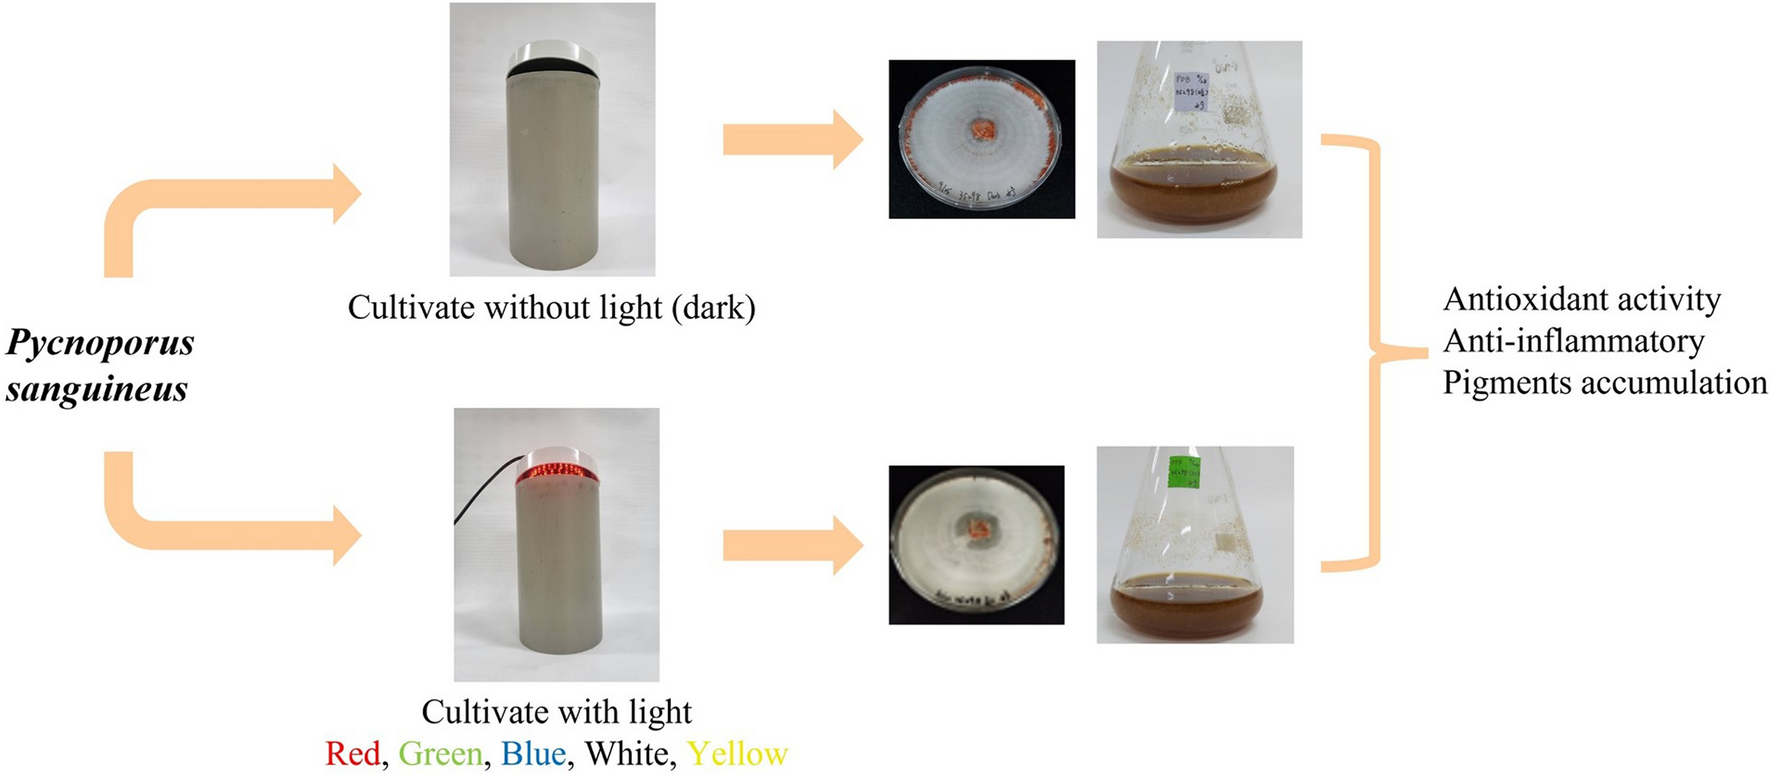 Different wavelengths of LED irradiation promote secondary metabolite production in Pycnoporus sanguineus for antioxidant and immunomodulatory applications